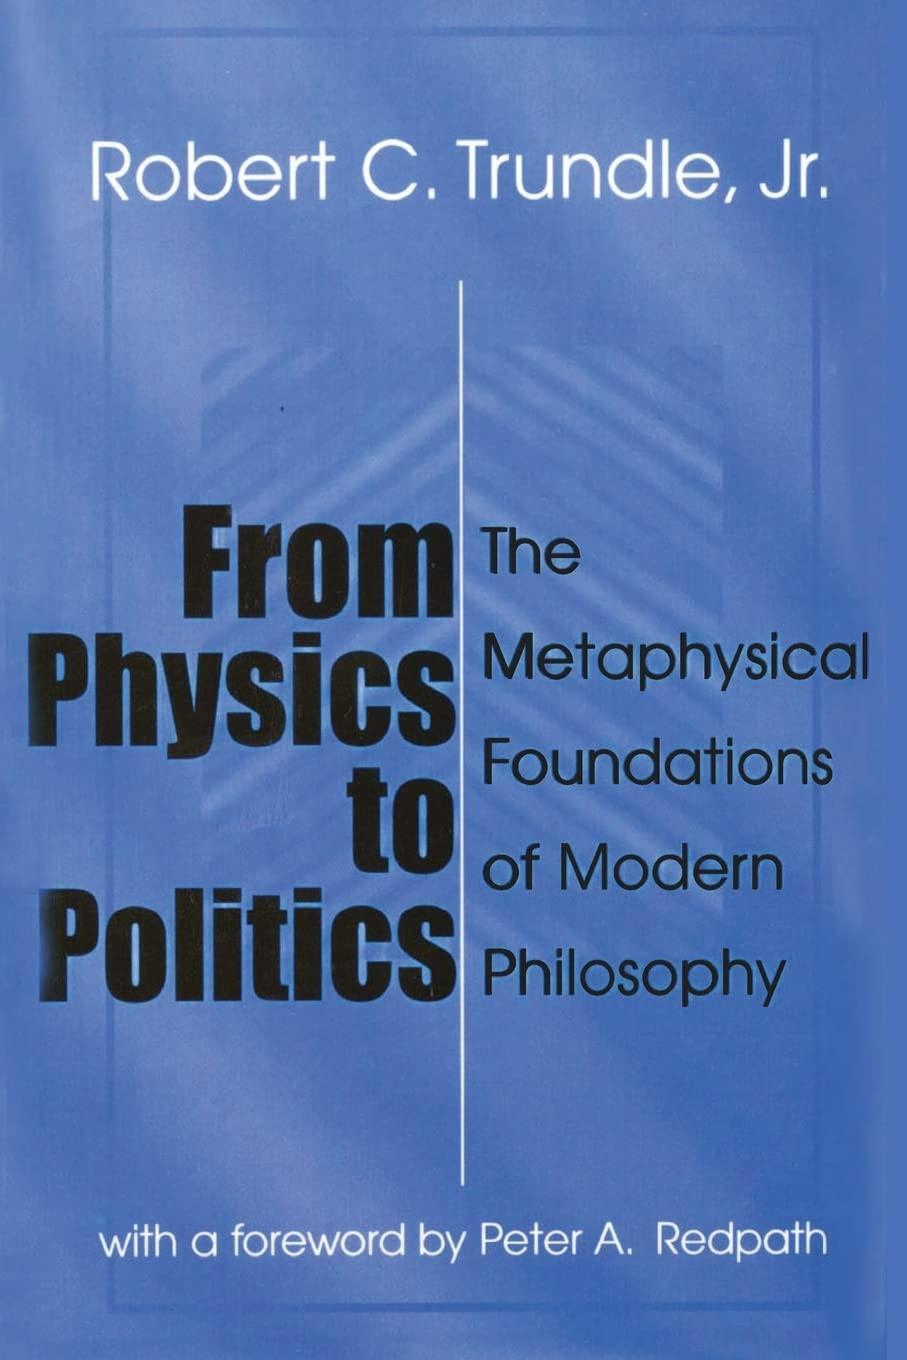 from physics to politics the metaphysical foundations of modern philosophy 2nd edition robert trundle